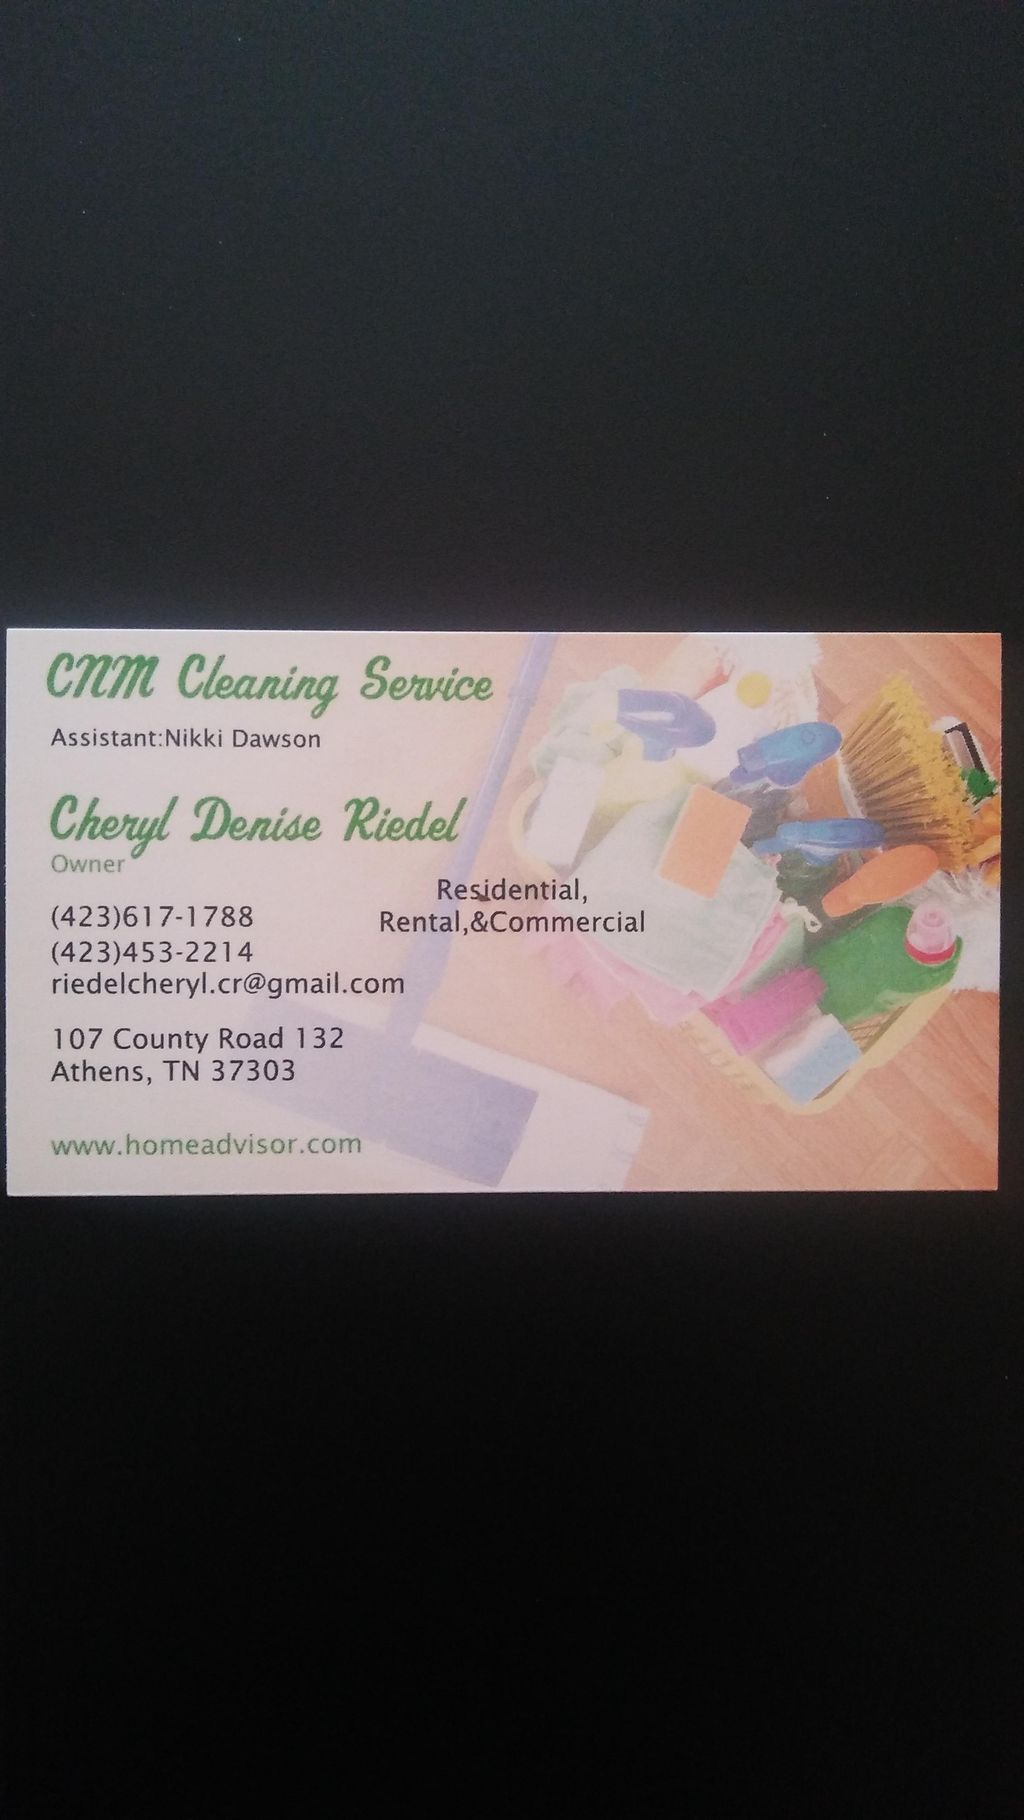 CNM Cleaning Service